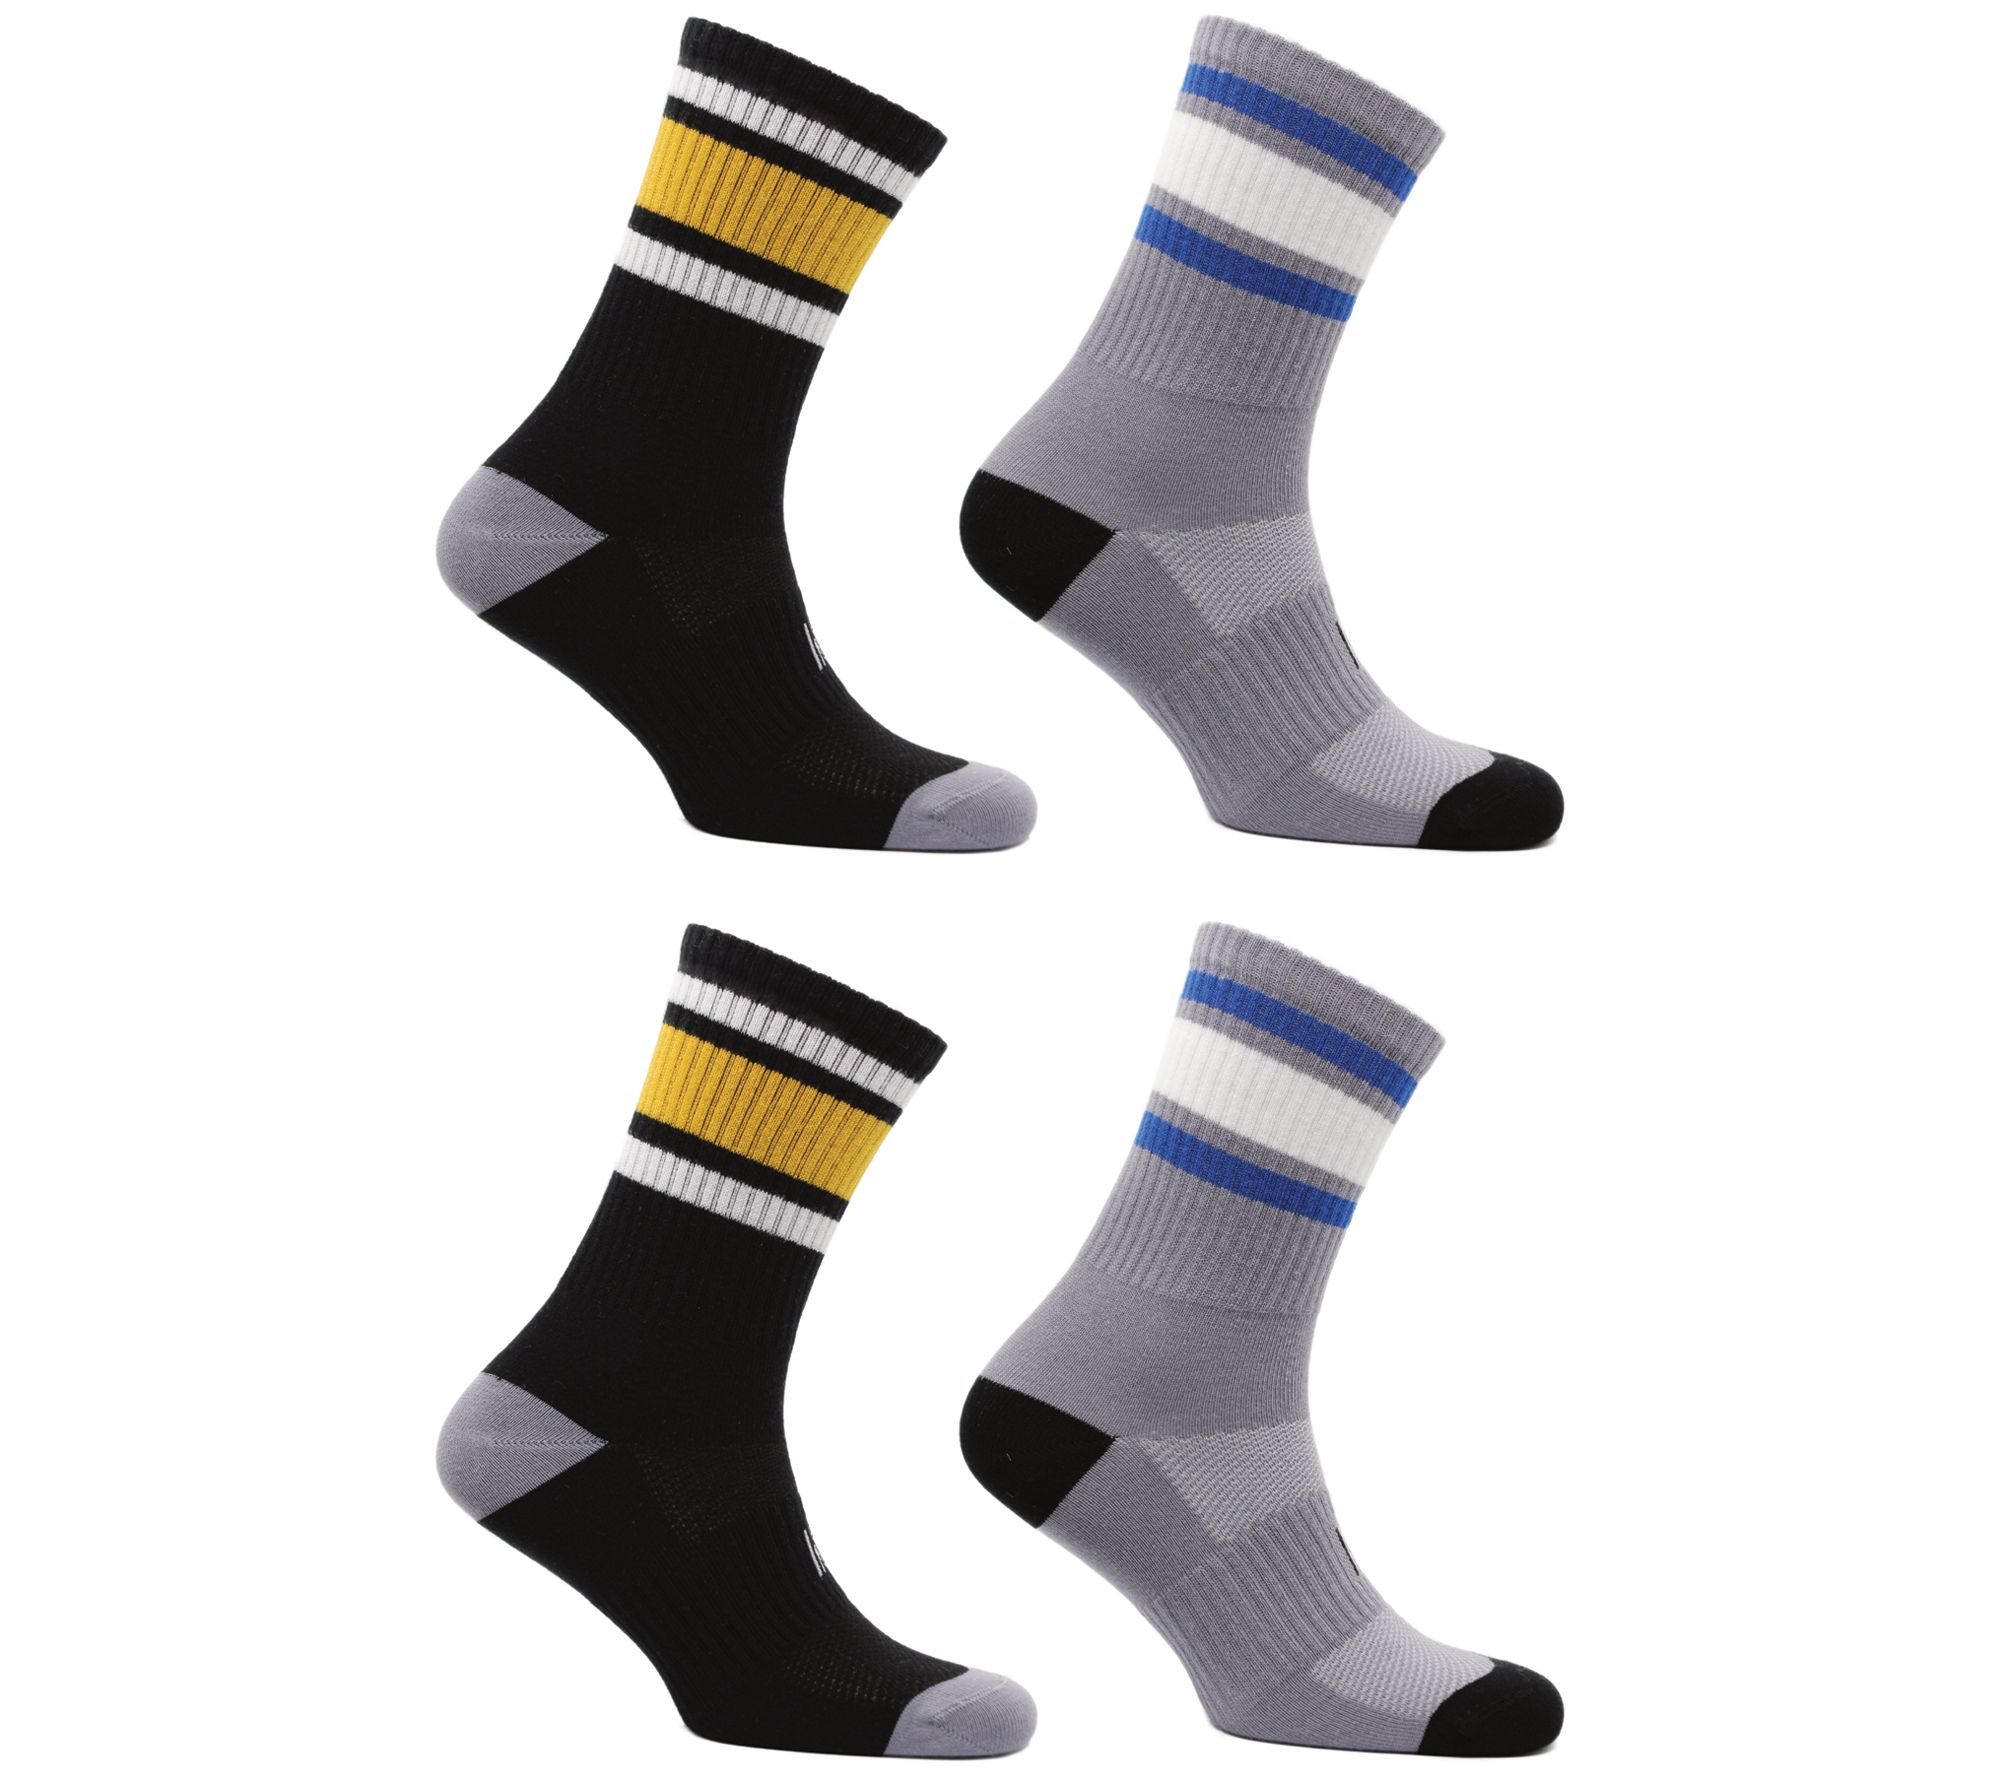 Cotton Sports Socks with Cushioning 2 Pair Pack - Barkley